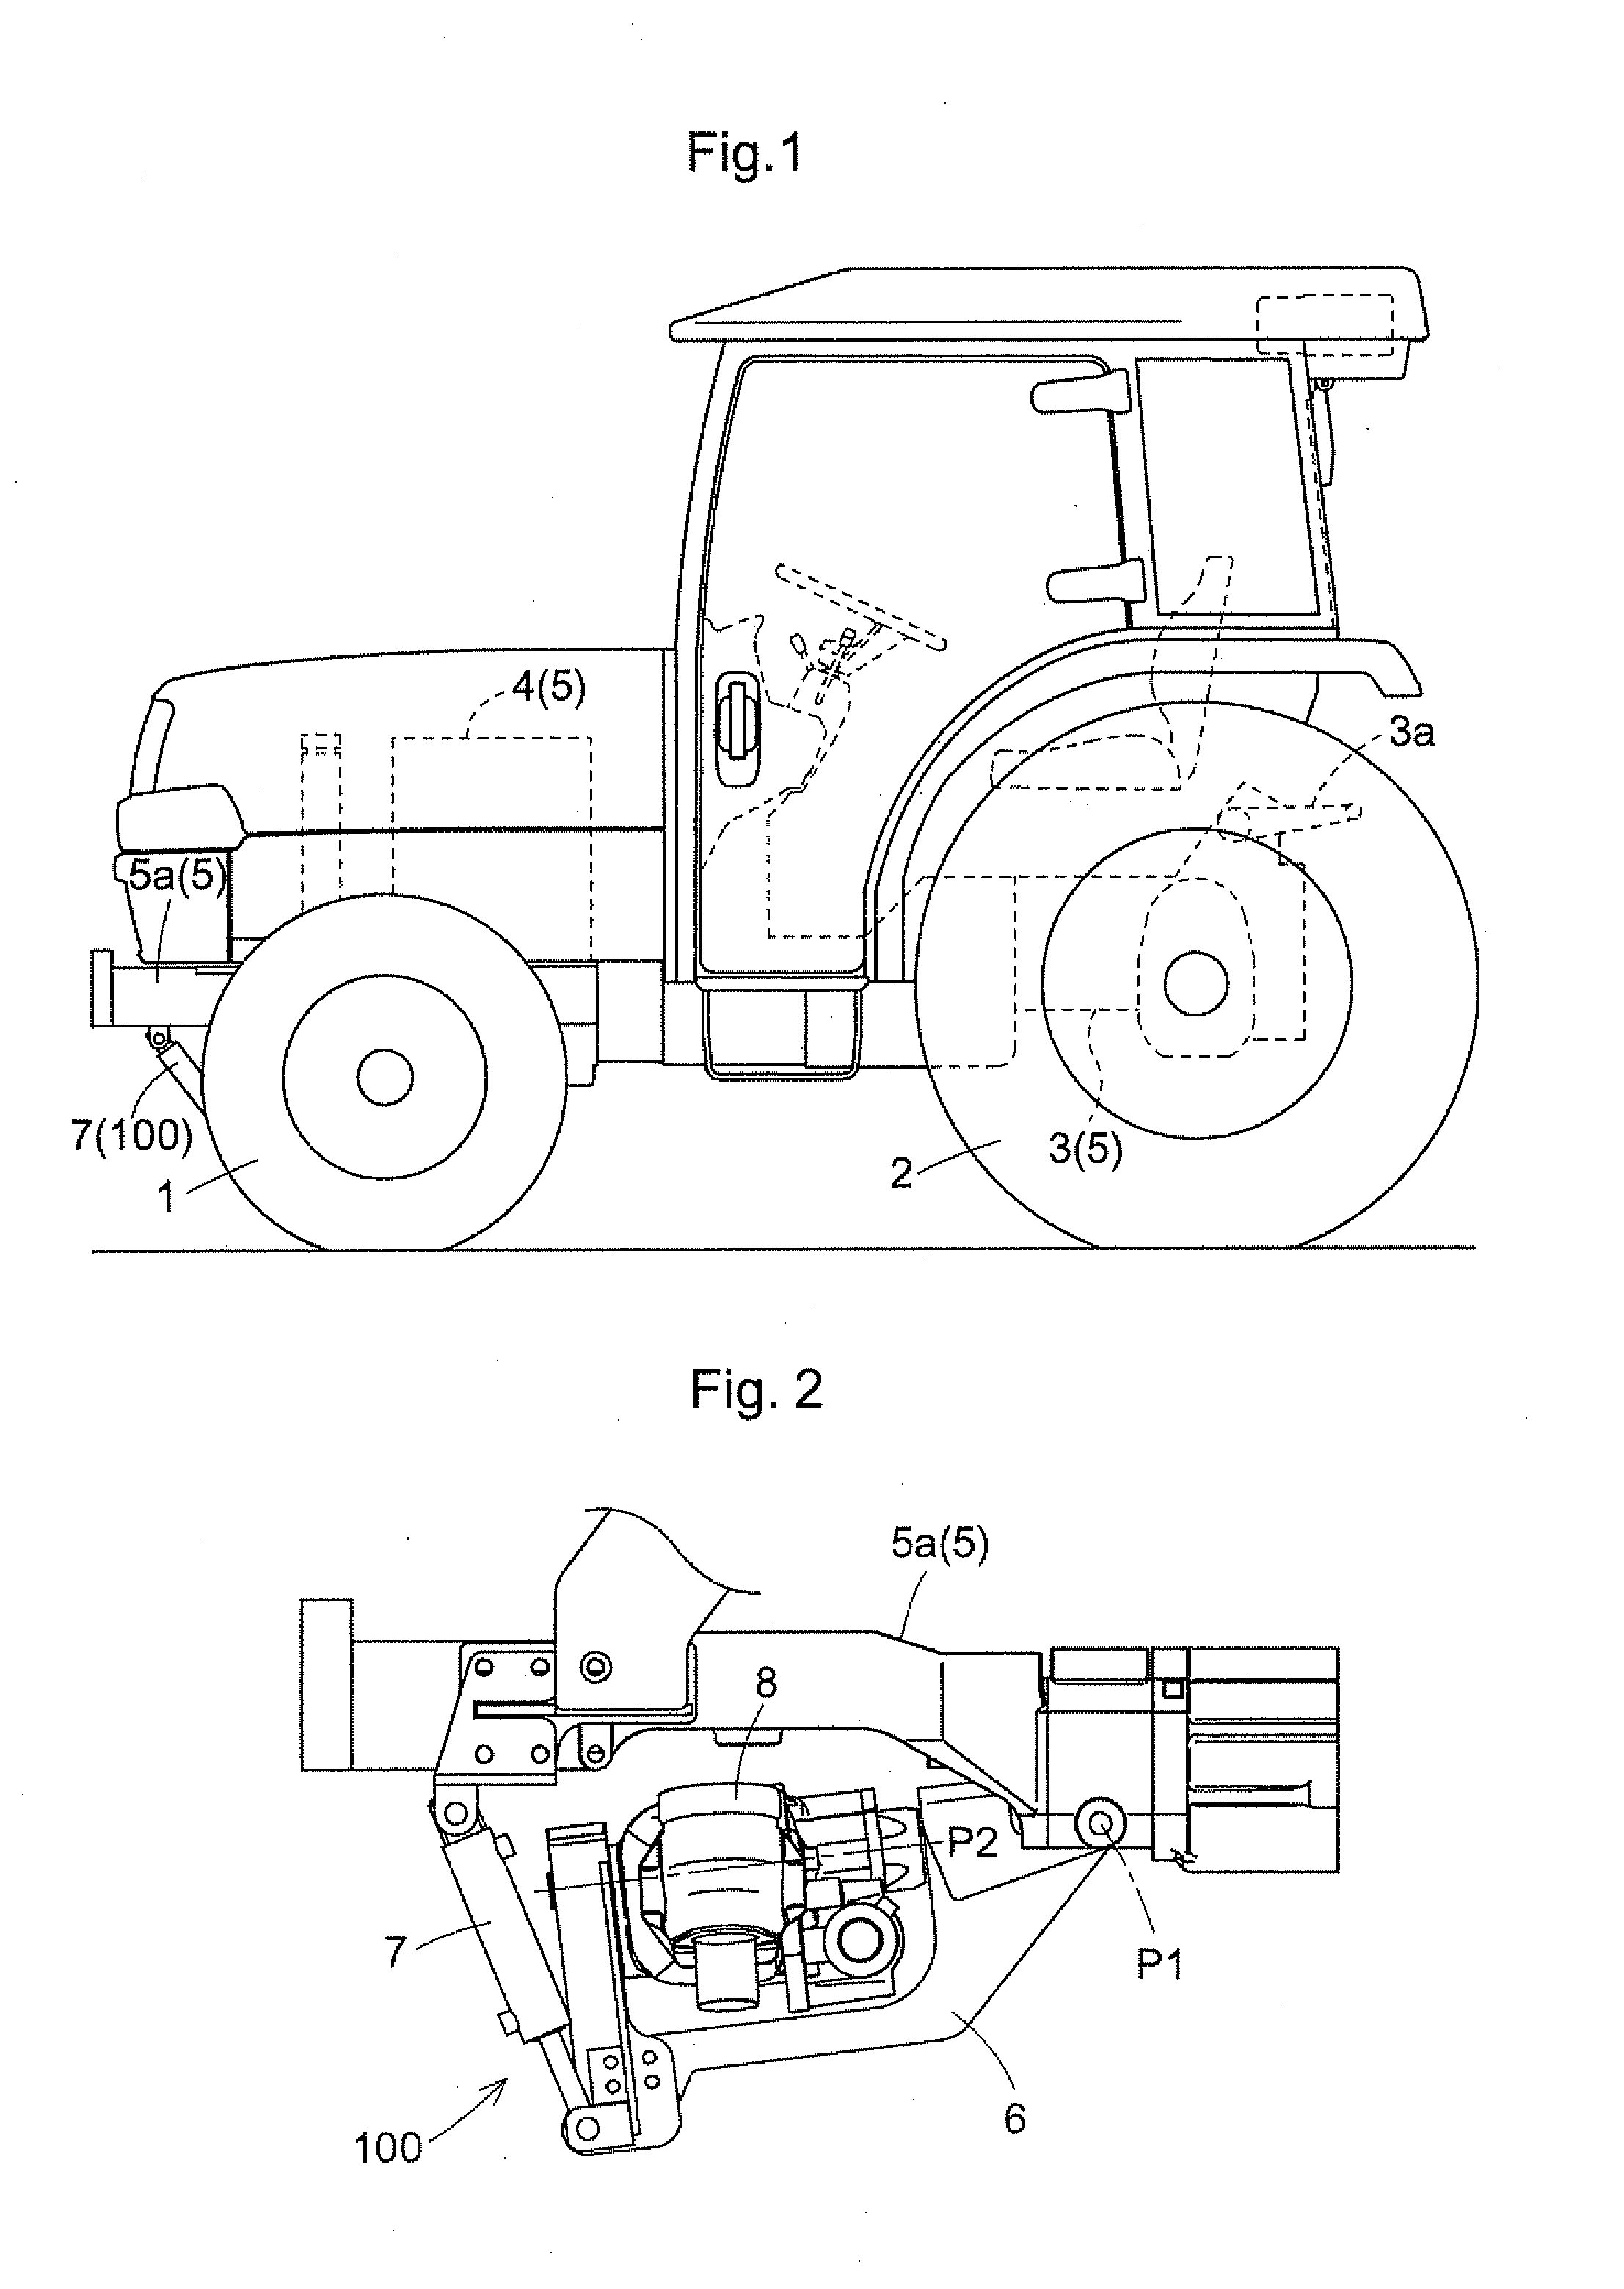 Hydraulic Suspension System for Work Vehicle